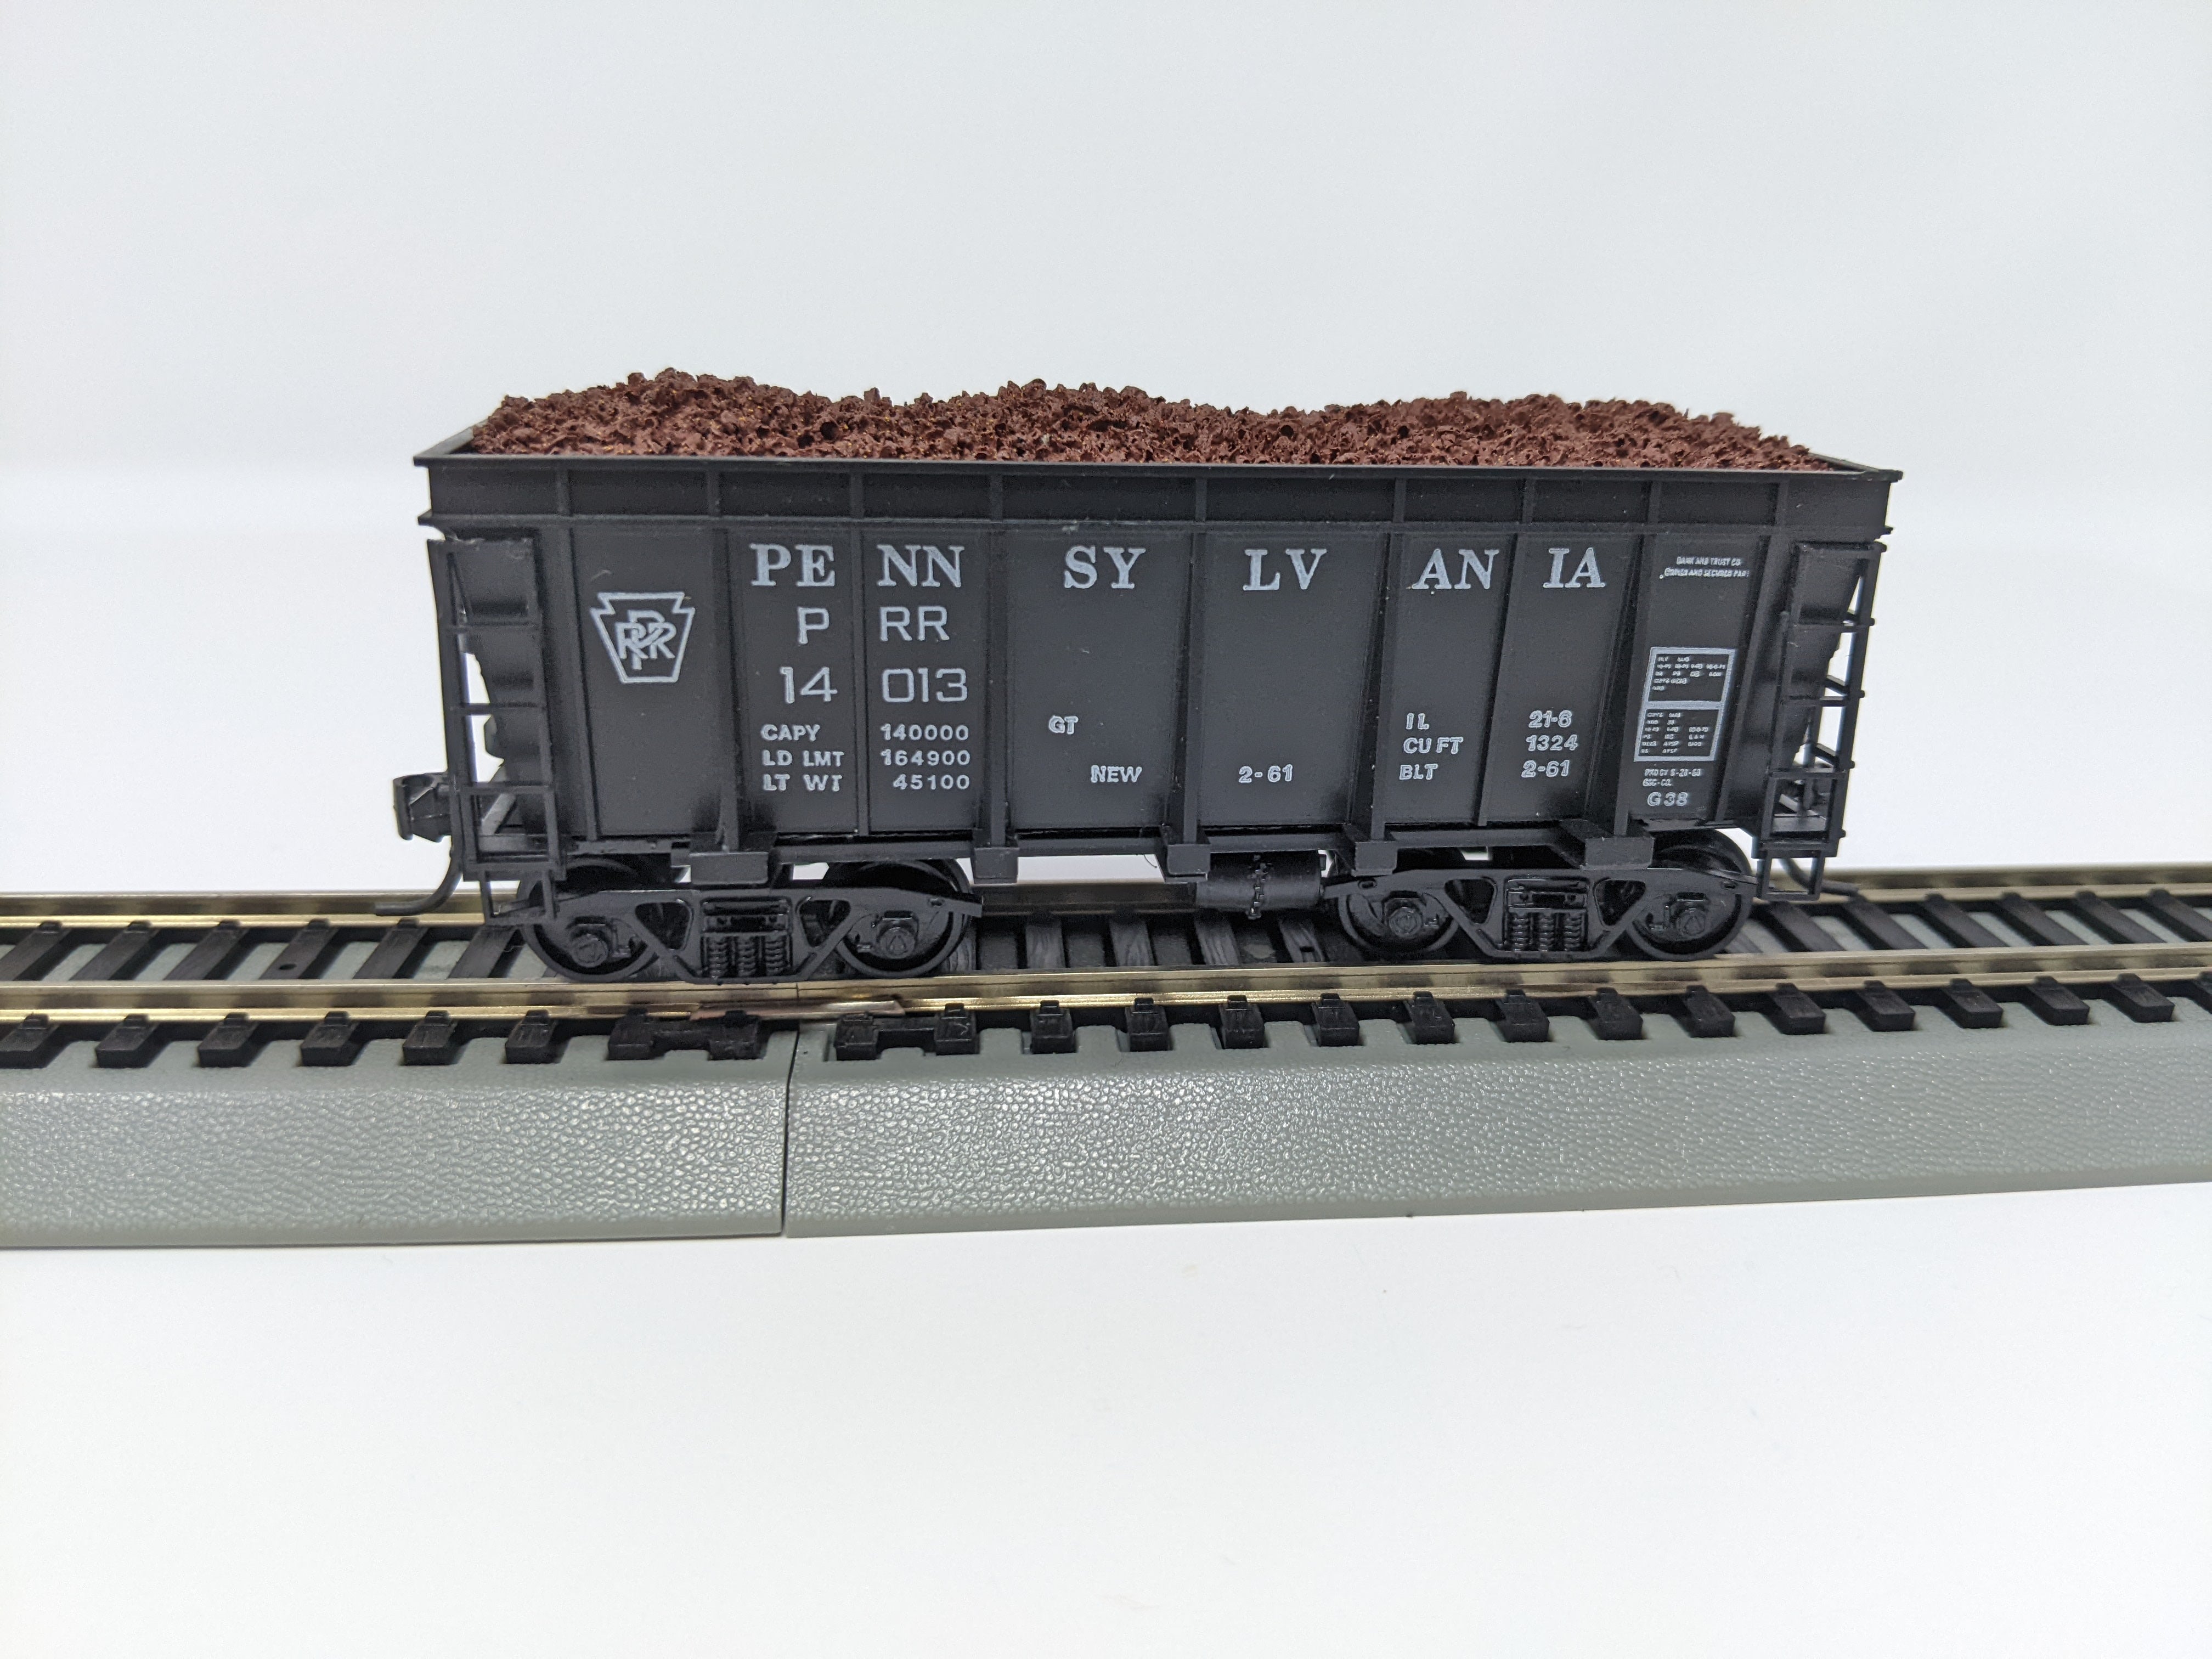 USED Roundhouse HO Scale, 26' High Side Ore Car, Pennsylvania PRR #14013